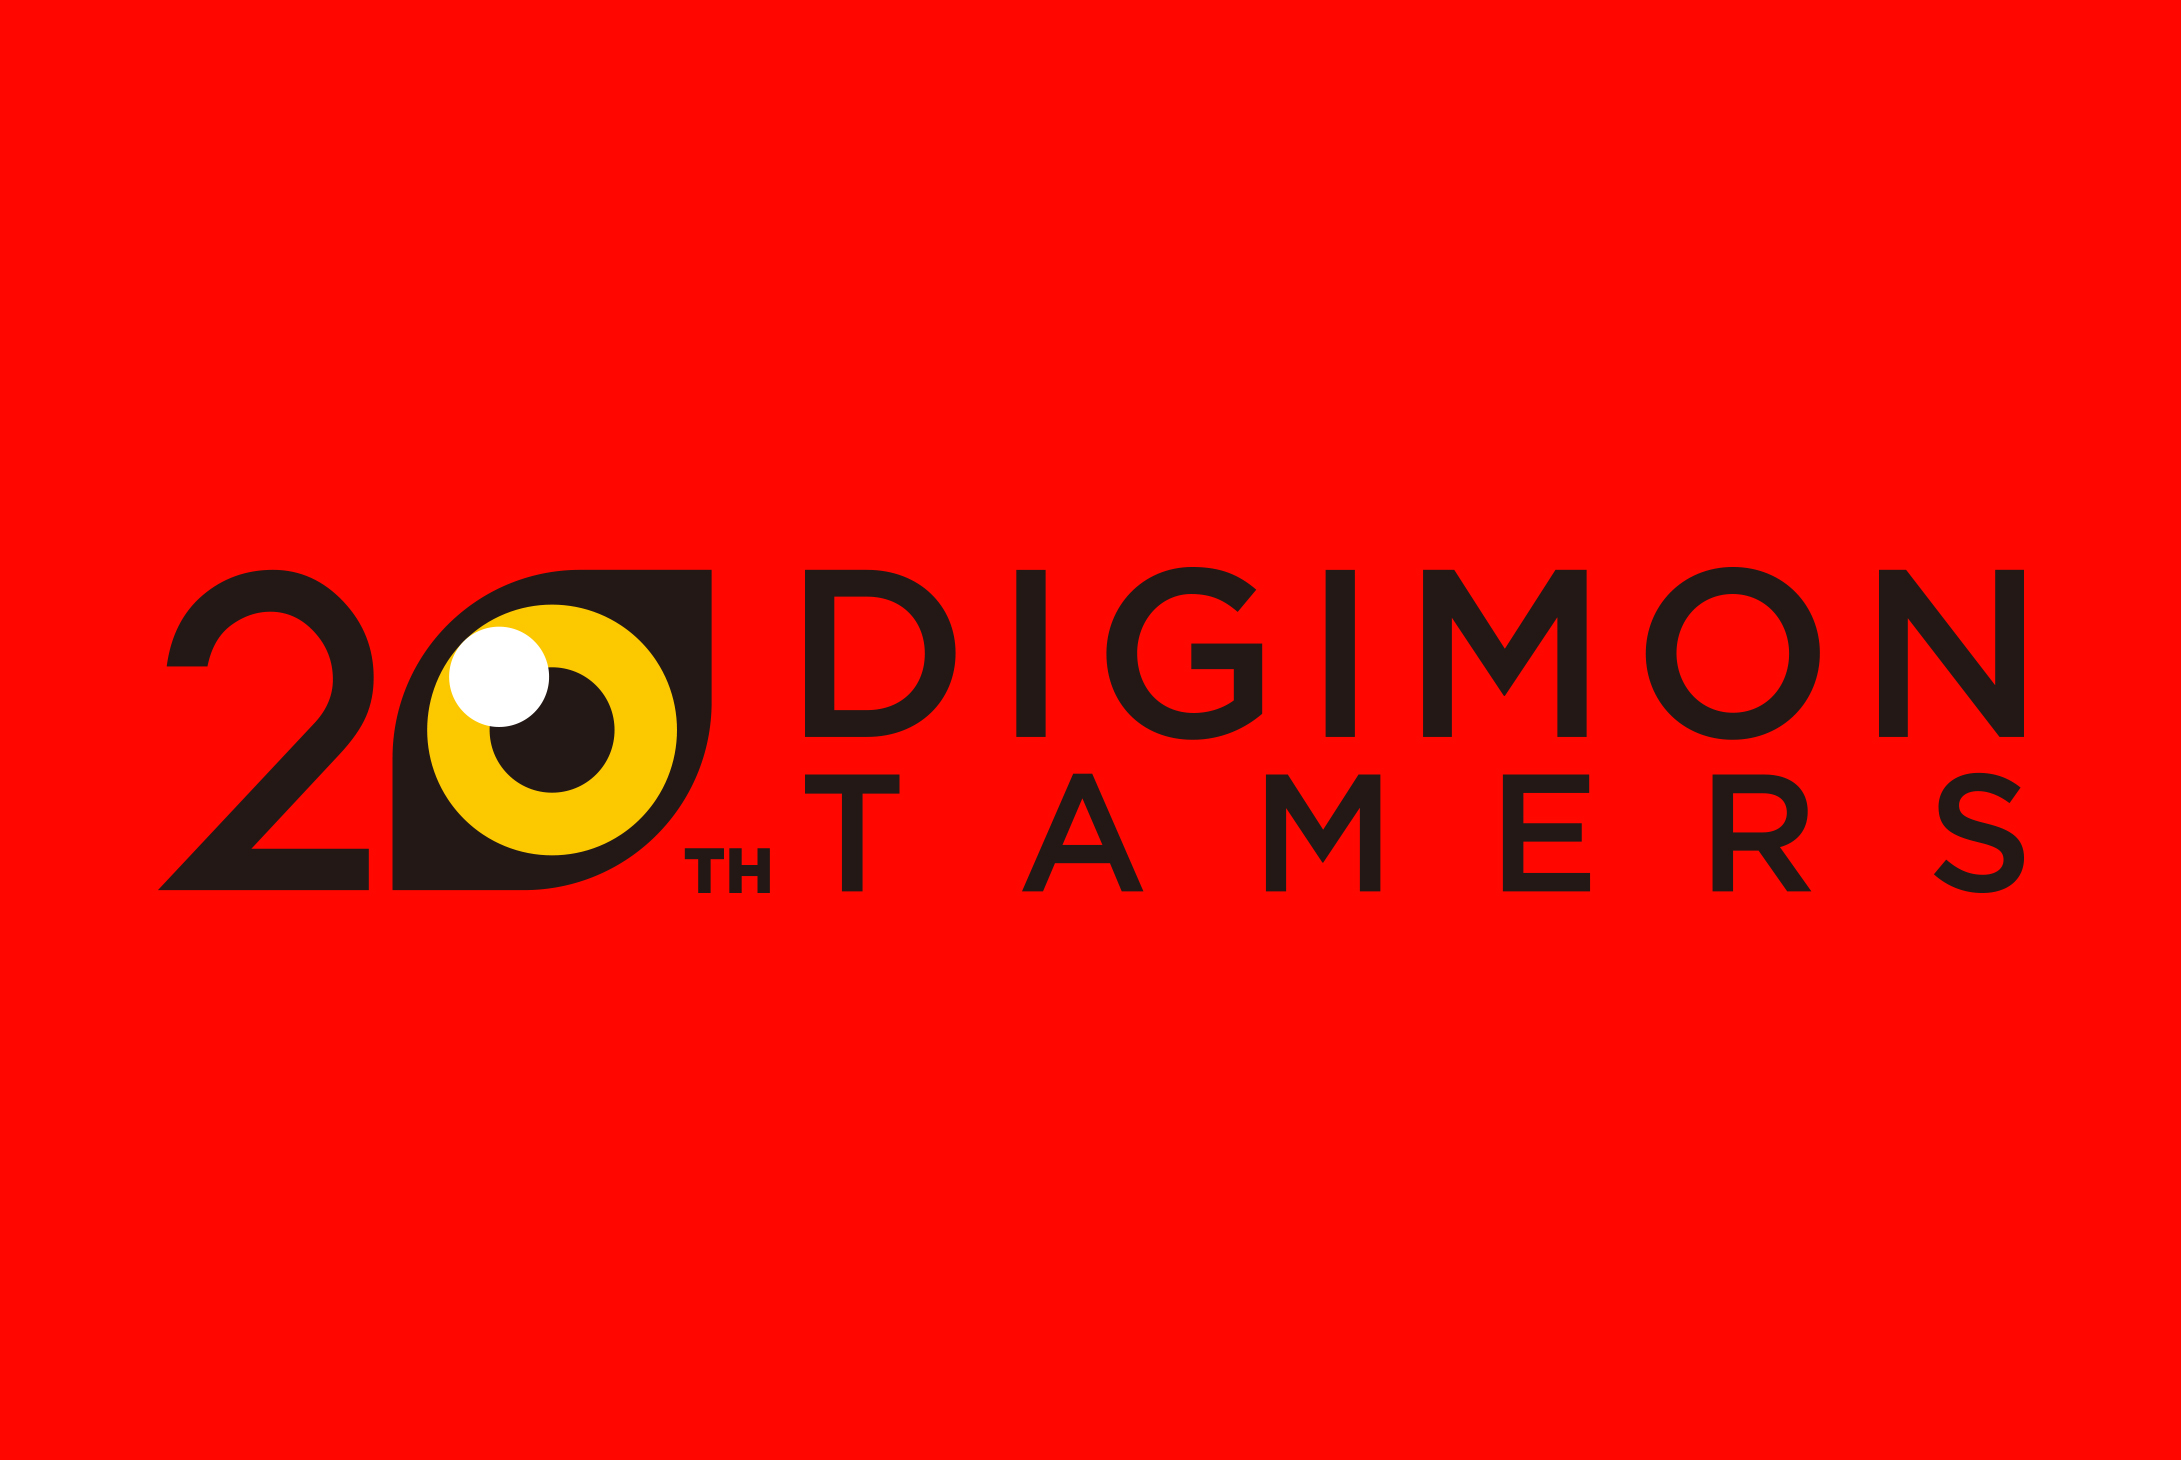 digimontamers20th_march31_2021.jpg